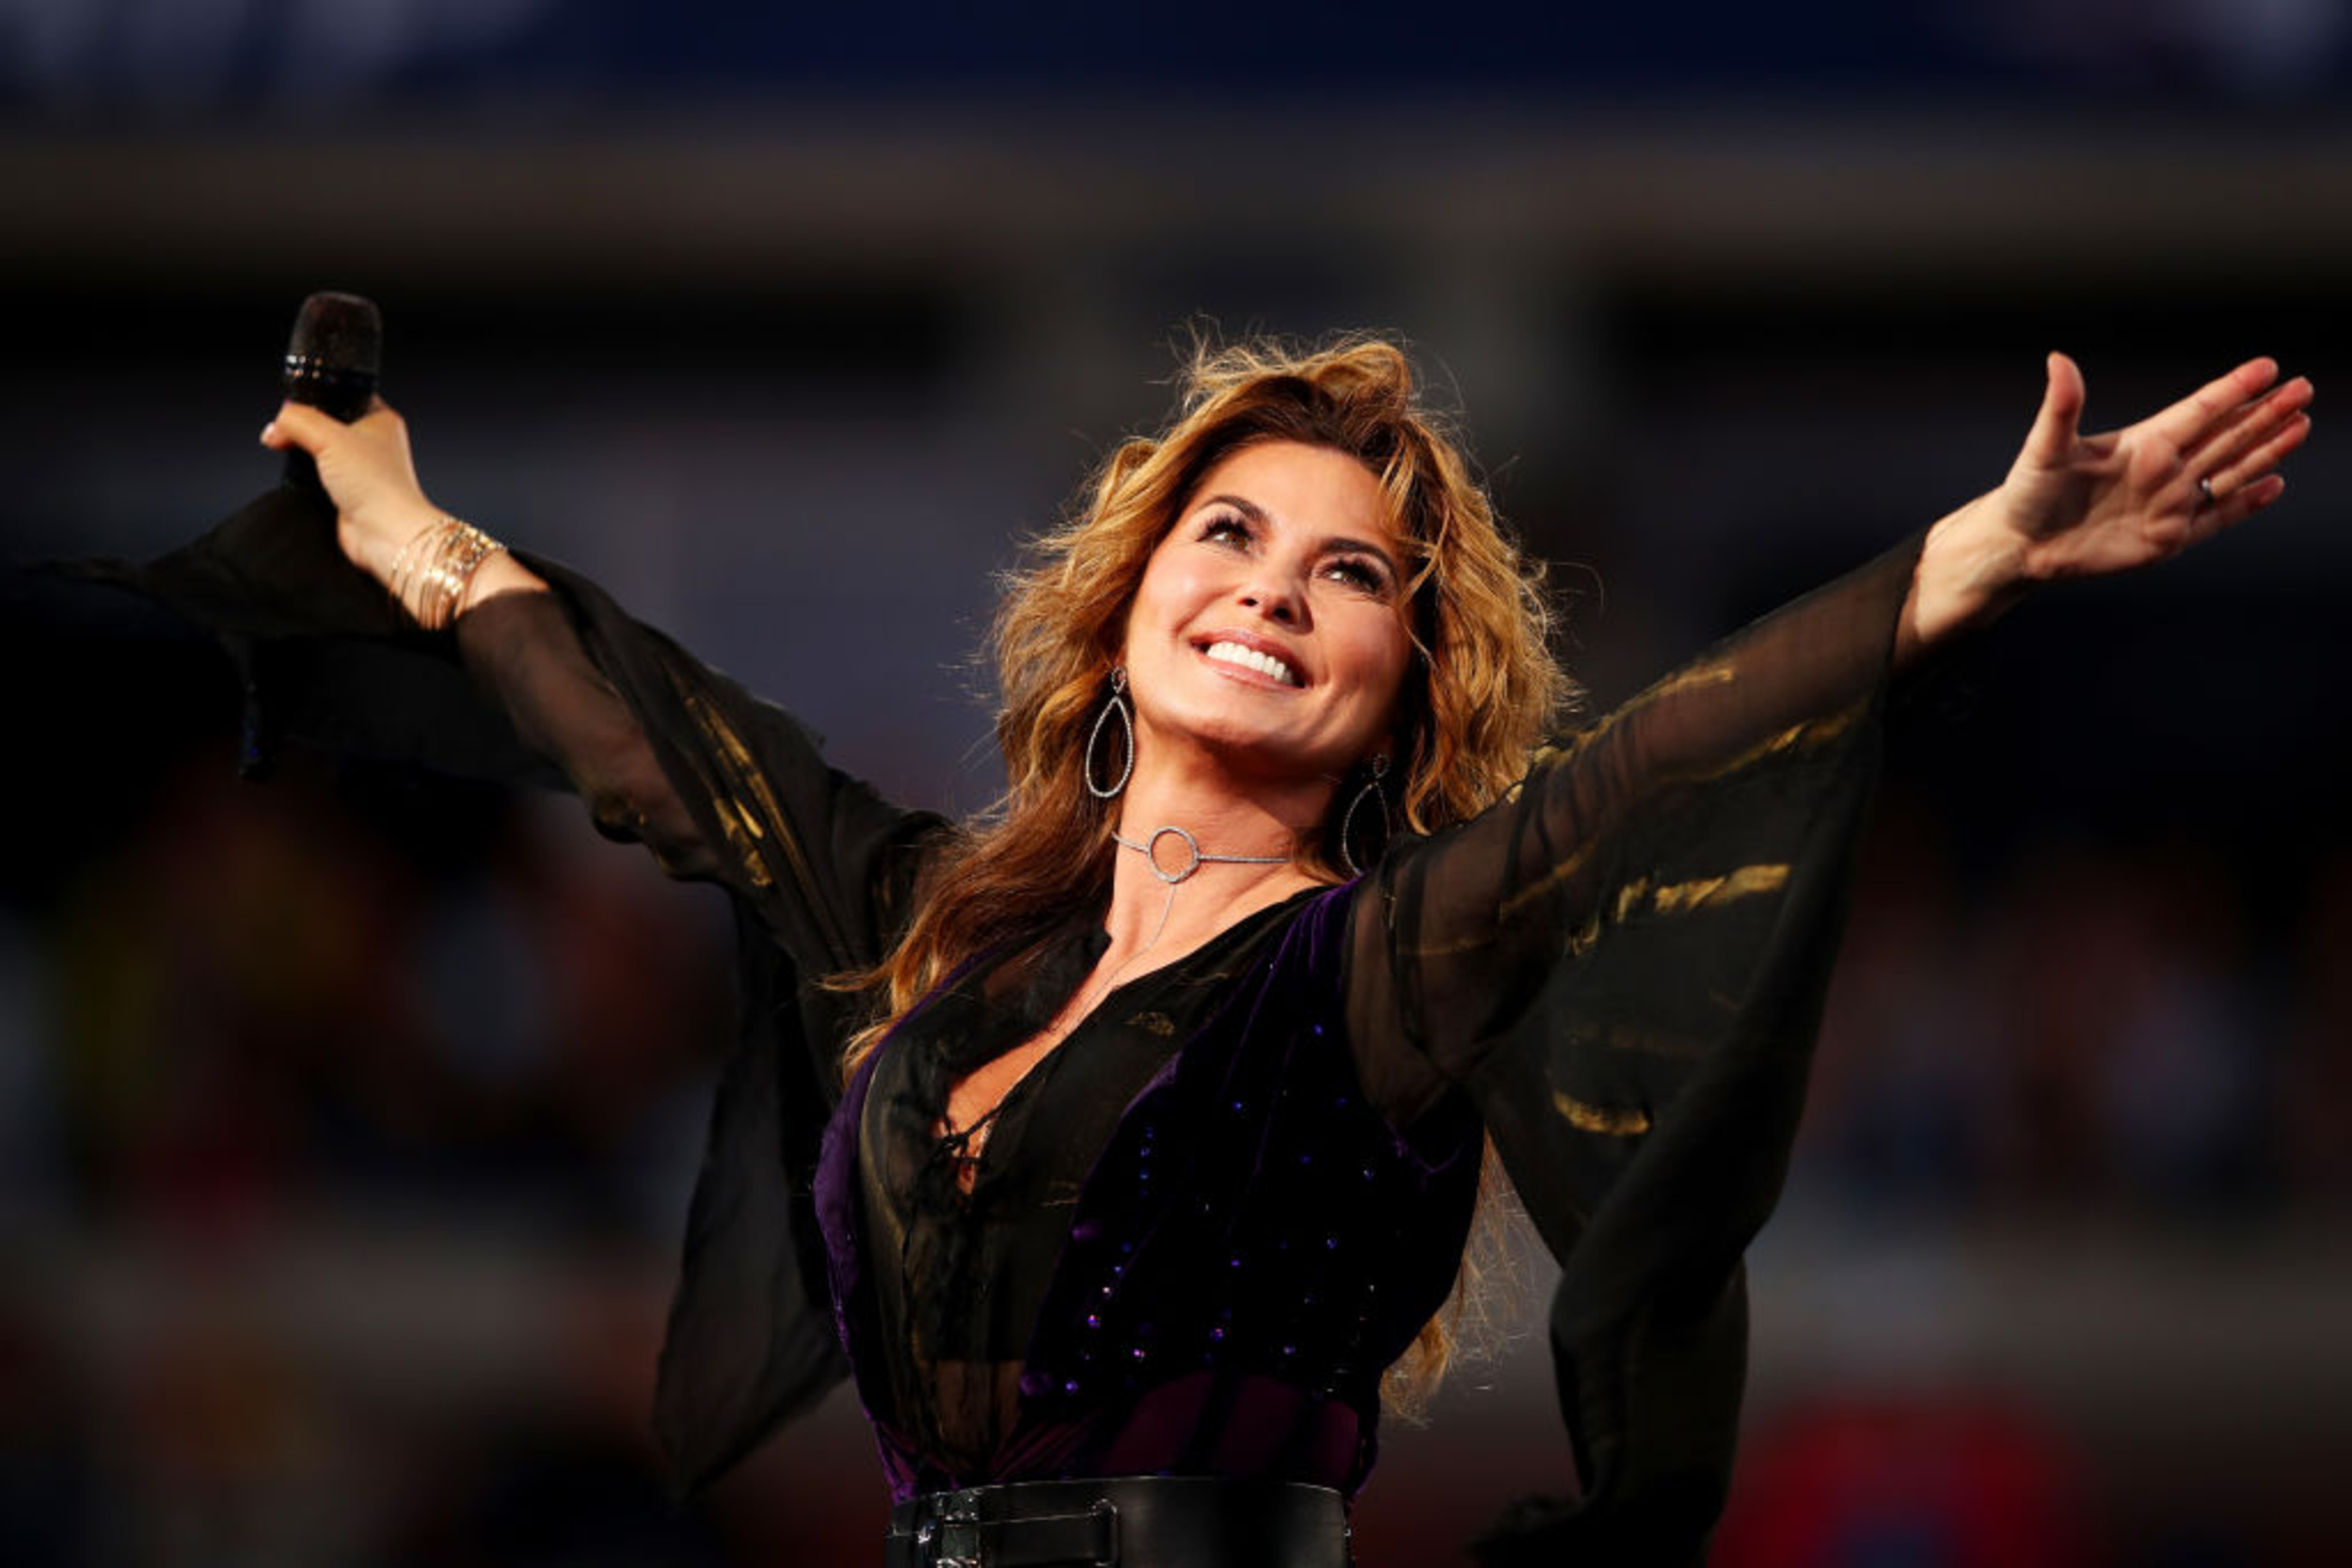 <p>Considering that Shania Twain remains the top-selling female artist of all time, she really should have her own place in the Country Music Hall of Fame. Her songs topped the charts in the '90s, and she continues to attract an audience of dedicated fans and release new music. </p><p>You may also like: <a href='https://www.yardbarker.com/entertainment/articles/the_best_covers_of_beatles_songs/s1__34247570'>The best covers of Beatles songs</a></p>